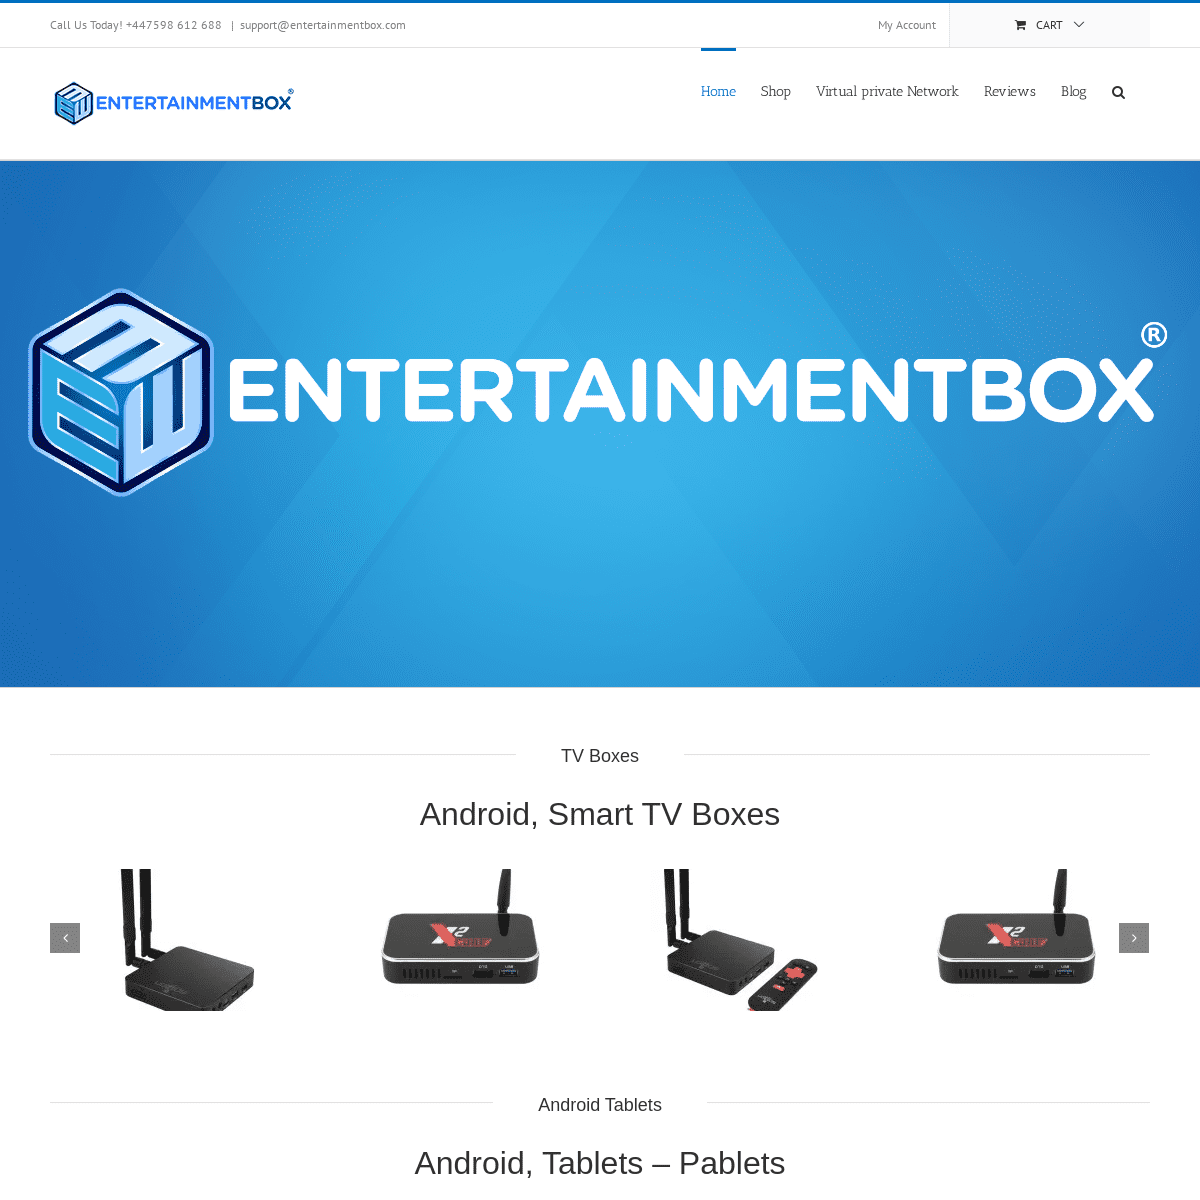 A complete backup of entertainmentbox.com